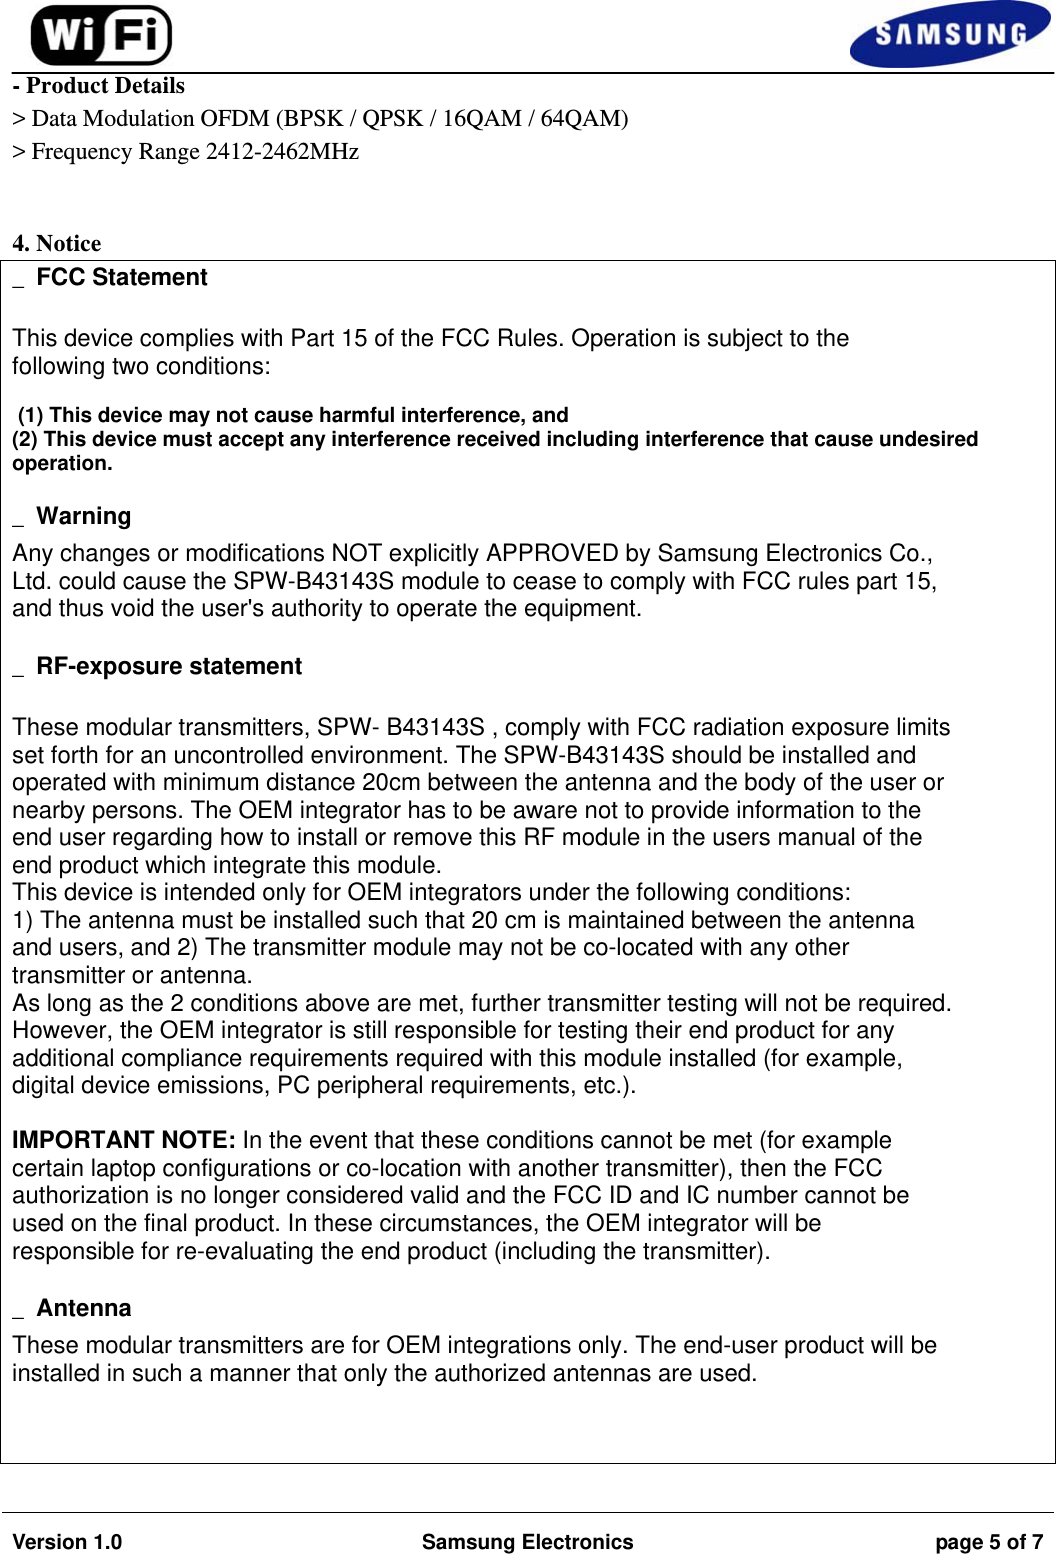                                                                                                                                         Version 1.0  Samsung Electronics  page 5 of 7   - Product Details &gt; Data Modulation OFDM (BPSK / QPSK / 16QAM / 64QAM) &gt; Frequency Range 2412-2462MHz                                   4. Notice _ FCC Statement  This device complies with Part 15 of the FCC Rules. Operation is subject to the following two conditions:   (1) This device may not cause harmful interference, and  (2) This device must accept any interference received including interference that cause undesired operation.   _ Warning Any changes or modifications NOT explicitly APPROVED by Samsung Electronics Co., Ltd. could cause the SPW-B43143S module to cease to comply with FCC rules part 15, and thus void the user&apos;s authority to operate the equipment.  _ RF-exposure statement  These modular transmitters, SPW- B43143S , comply with FCC radiation exposure limits set forth for an uncontrolled environment. The SPW-B43143S should be installed and operated with minimum distance 20cm between the antenna and the body of the user or nearby persons. The OEM integrator has to be aware not to provide information to the end user regarding how to install or remove this RF module in the users manual of the end product which integrate this module. This device is intended only for OEM integrators under the following conditions: 1) The antenna must be installed such that 20 cm is maintained between the antenna and users, and 2) The transmitter module may not be co-located with any other transmitter or antenna. As long as the 2 conditions above are met, further transmitter testing will not be required. However, the OEM integrator is still responsible for testing their end product for any additional compliance requirements required with this module installed (for example, digital device emissions, PC peripheral requirements, etc.).  IMPORTANT NOTE: In the event that these conditions cannot be met (for example certain laptop configurations or co-location with another transmitter), then the FCC authorization is no longer considered valid and the FCC ID and IC number cannot be used on the final product. In these circumstances, the OEM integrator will be responsible for re-evaluating the end product (including the transmitter).  _ Antenna These modular transmitters are for OEM integrations only. The end-user product will be installed in such a manner that only the authorized antennas are used.    